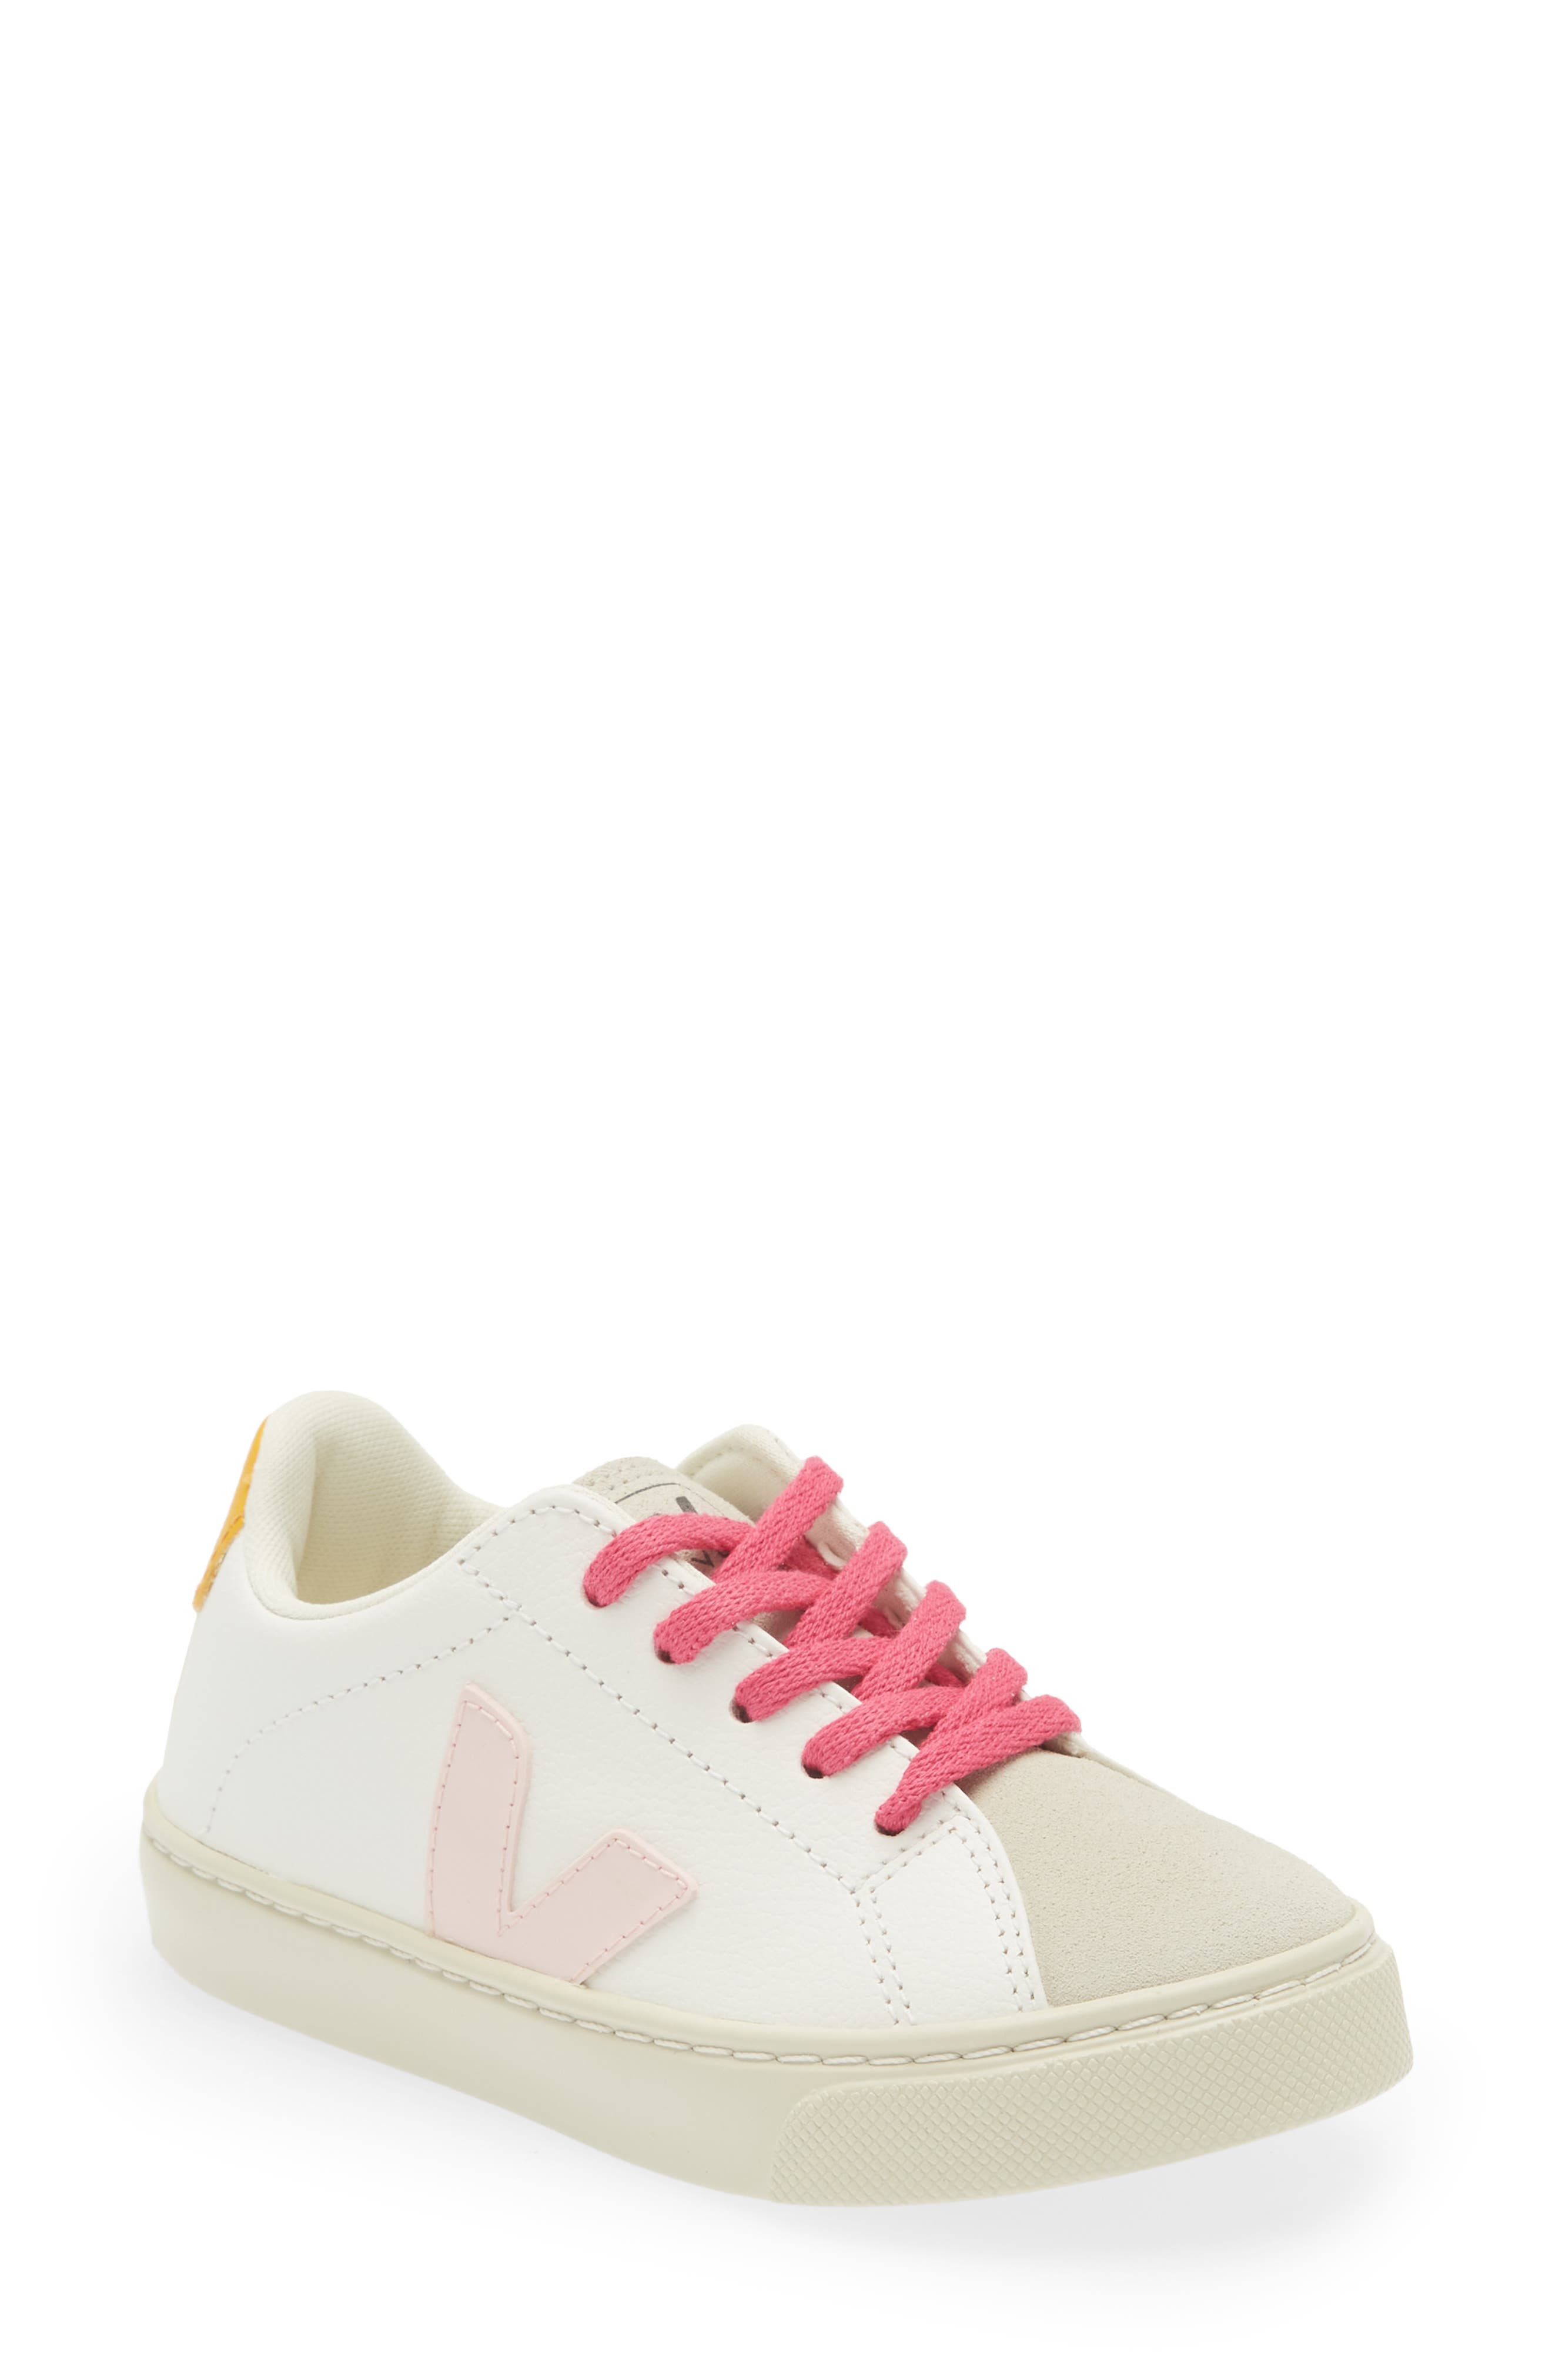 Veja Small Lace-Up Esplar Sneaker in Extra White Petale Ouro at Nordstrom, Size 12Us